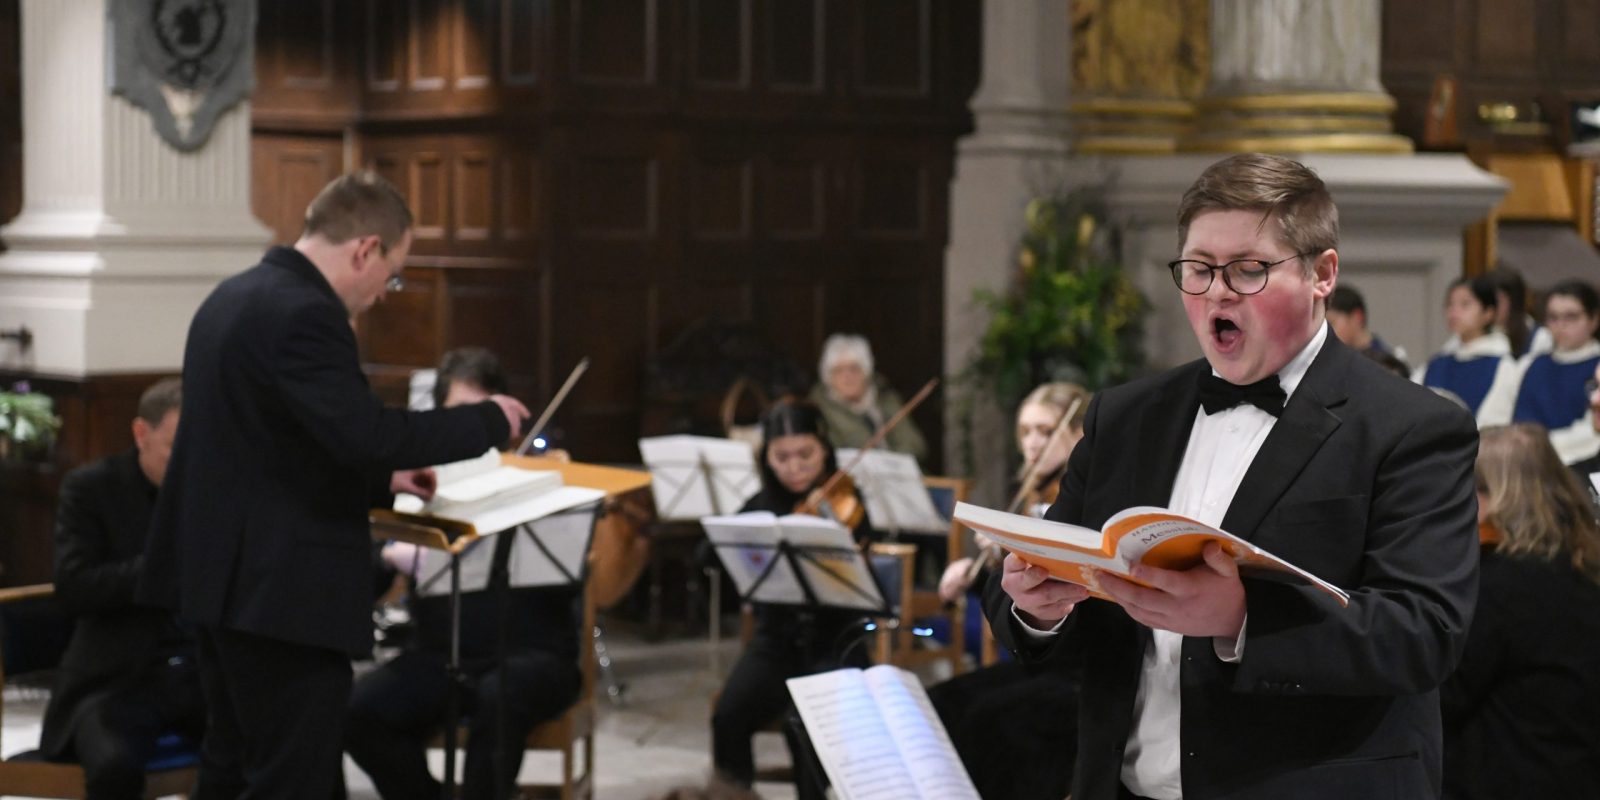 Performance of Handel's Messiah at Birmingham Cathedral